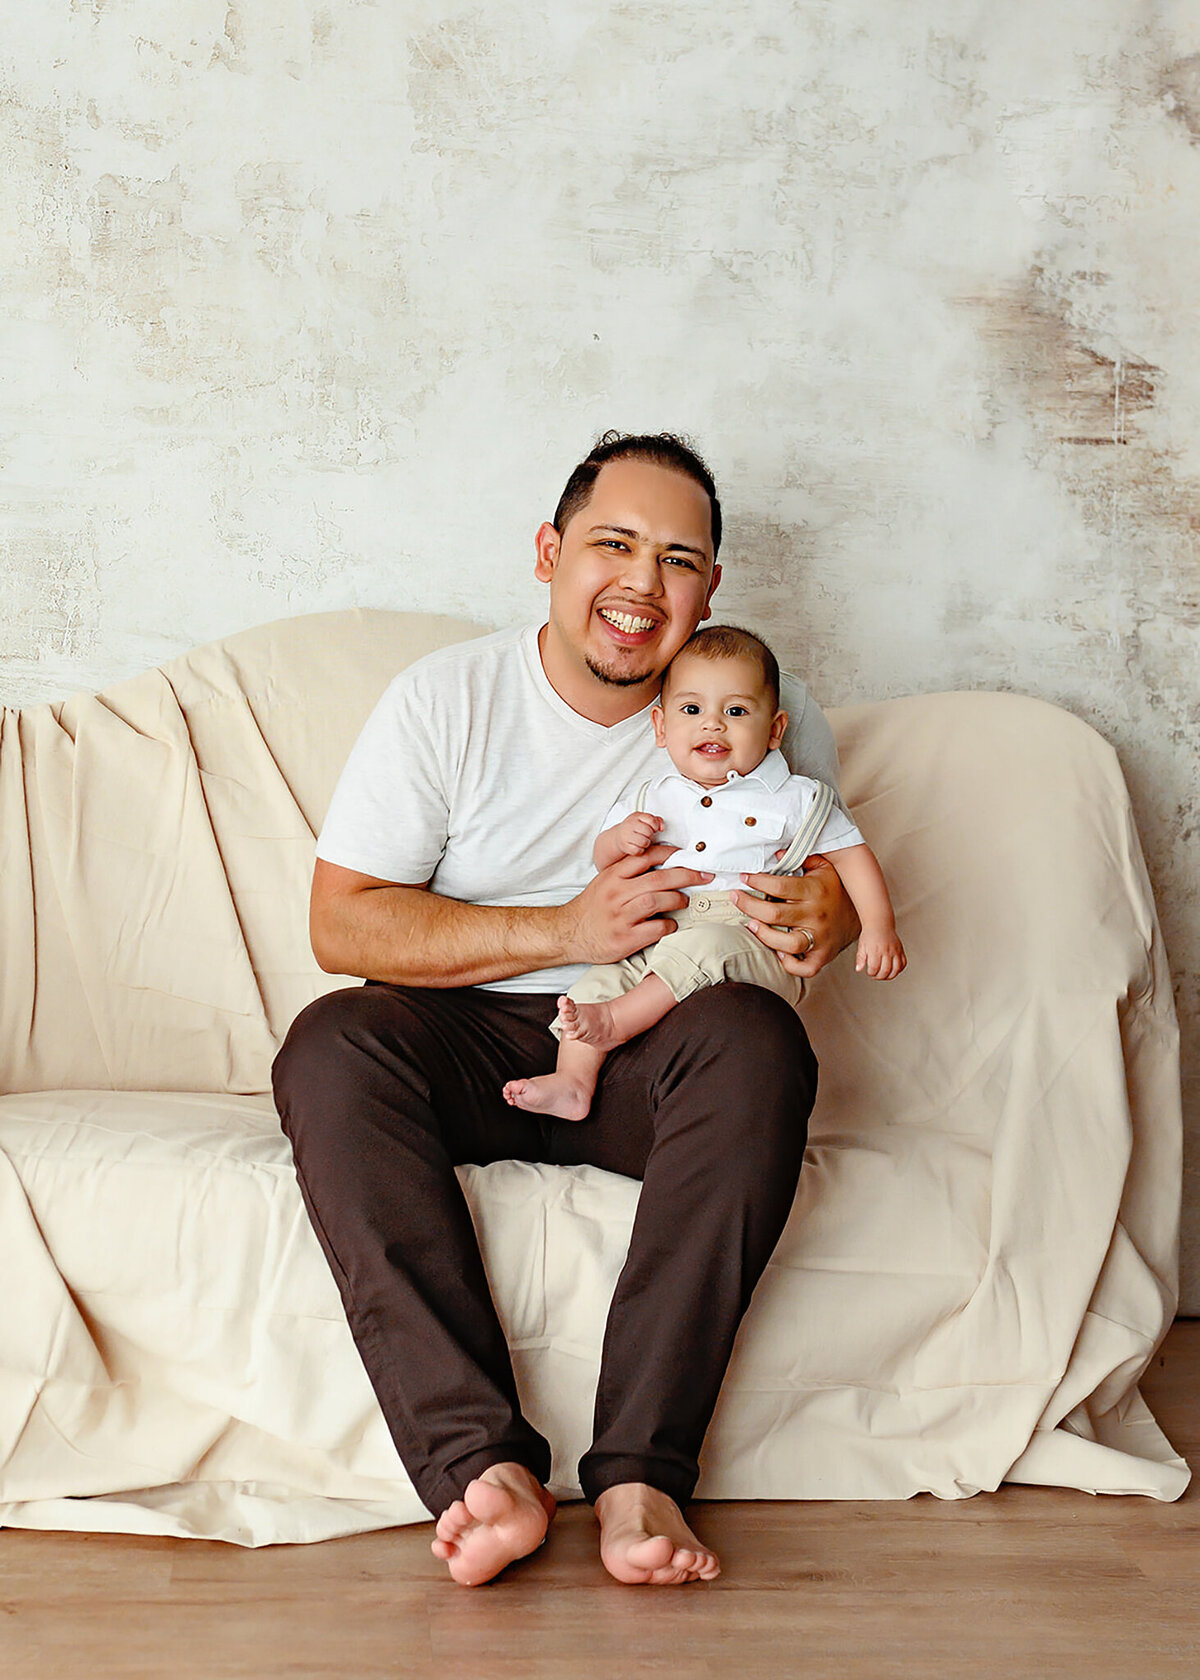 portrait of dad and son in a minimalistic setting, canvas covered couch white textured background